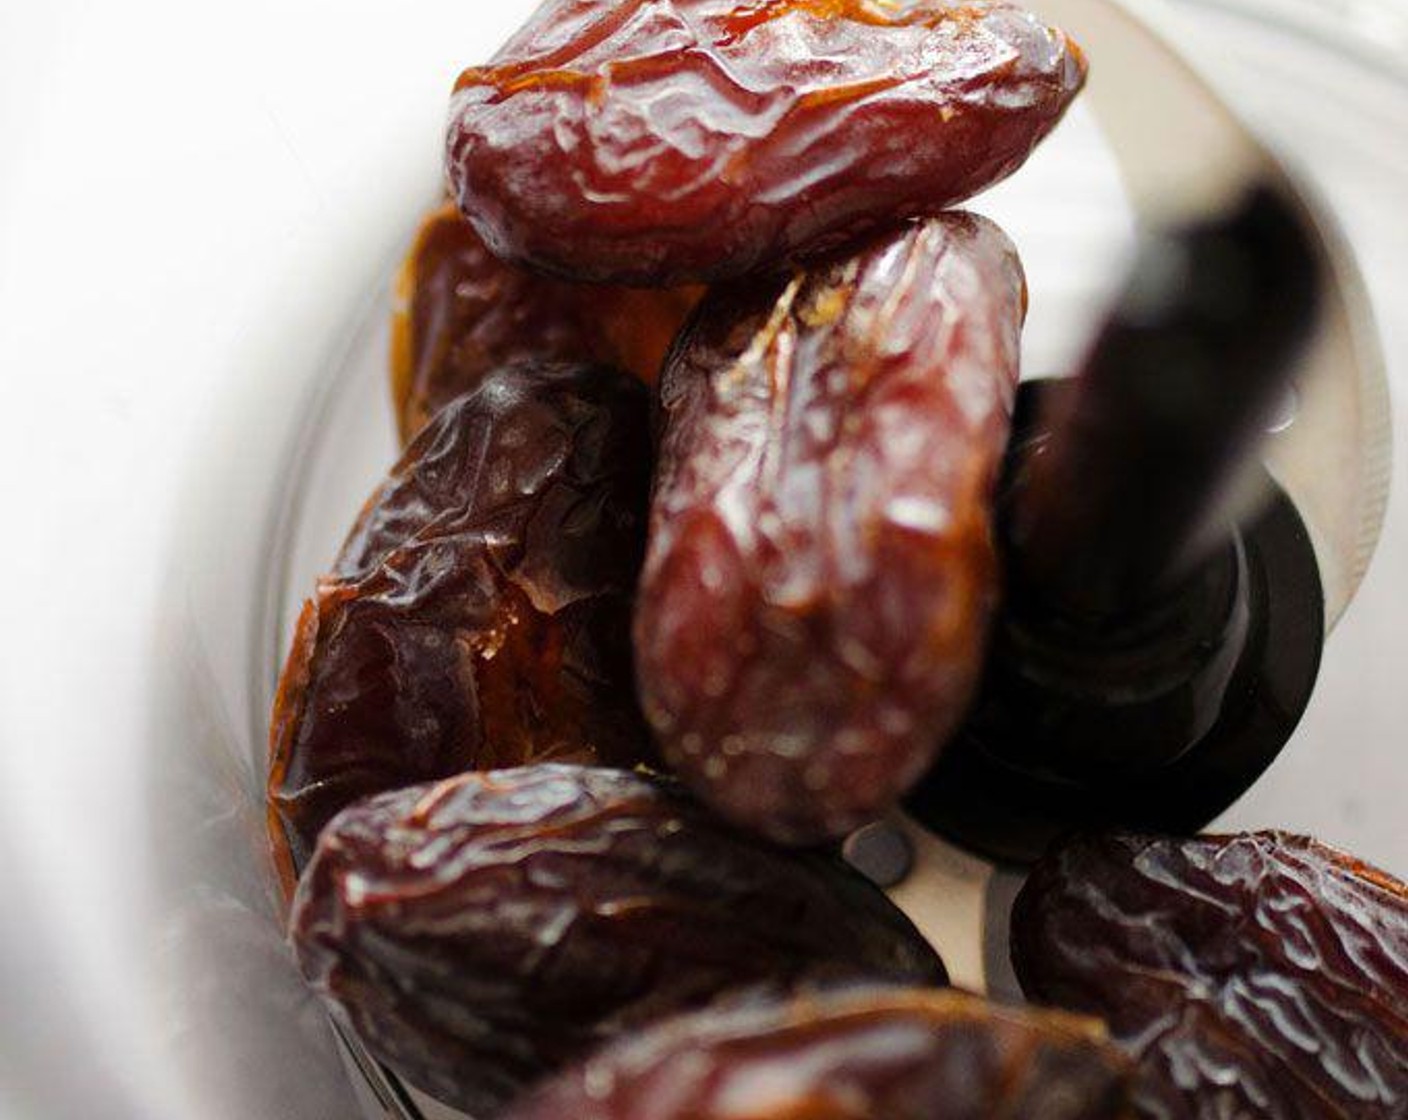 step 1 In a food processor, puree Dates (1/2 cup) into a smooth paste. If your dates are quite hard, soak them in warm water for a bit before pureeing.